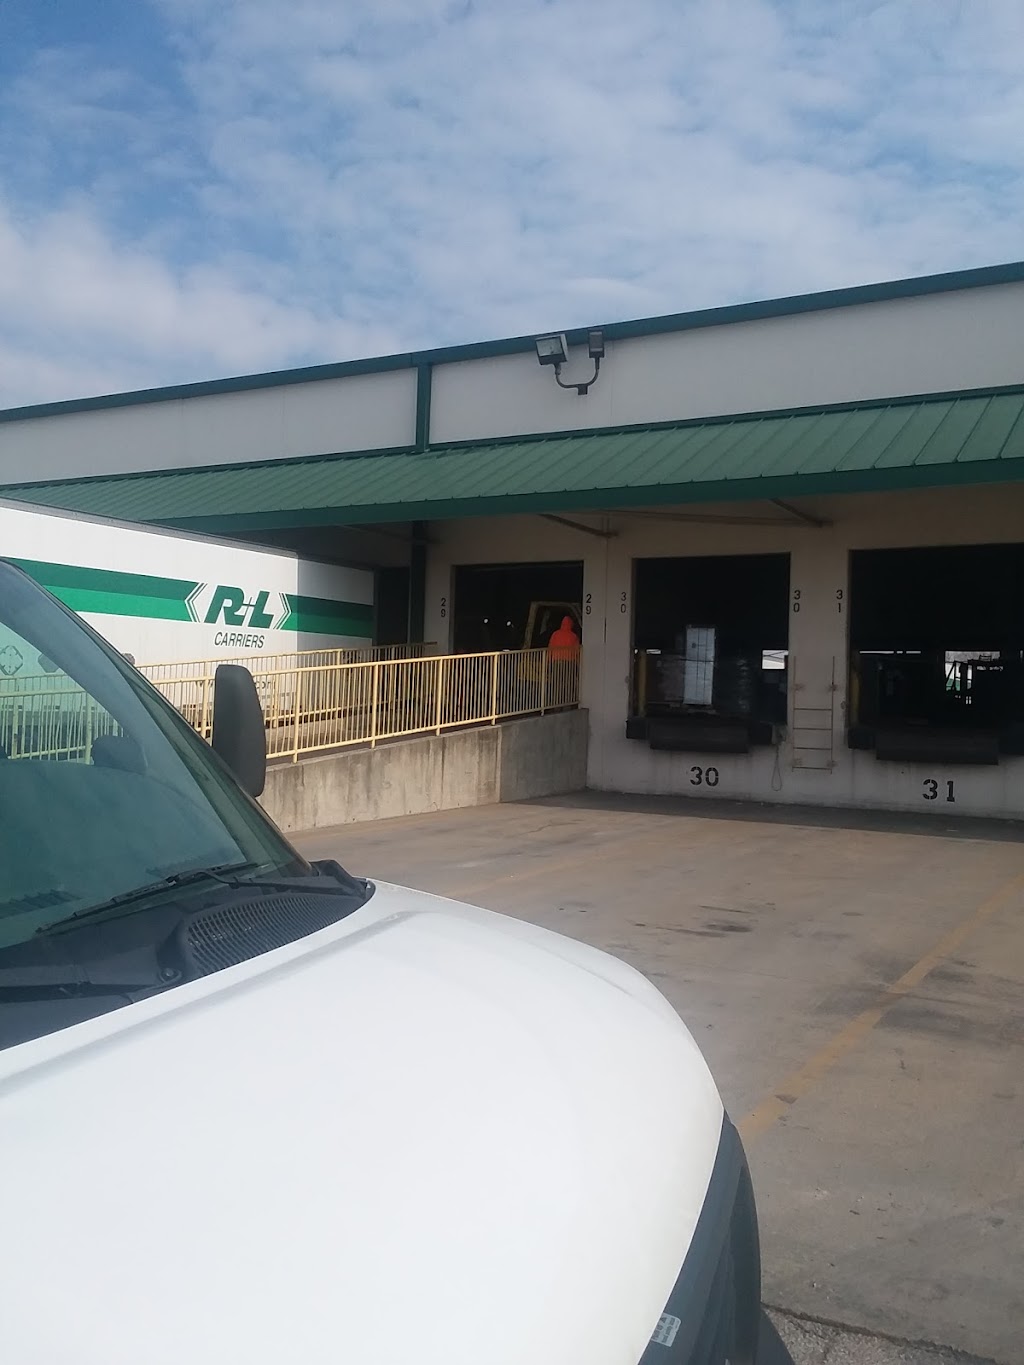 R+L Carriers | 1740 Sauget Industrial Pkwy, East St Louis, IL 62206 | Phone: (618) 332-0529